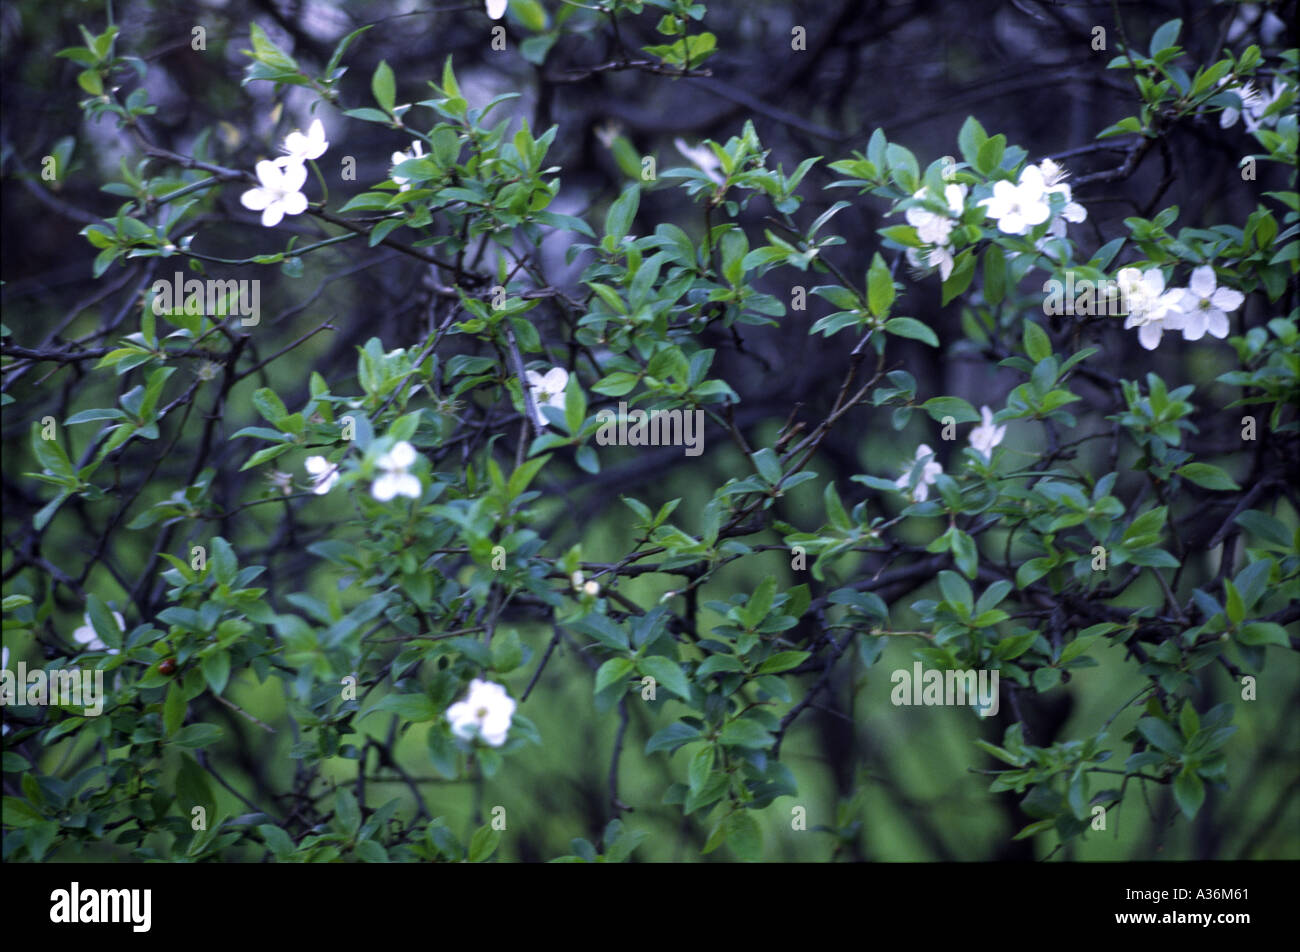 Bush with white flowers Stock Photo